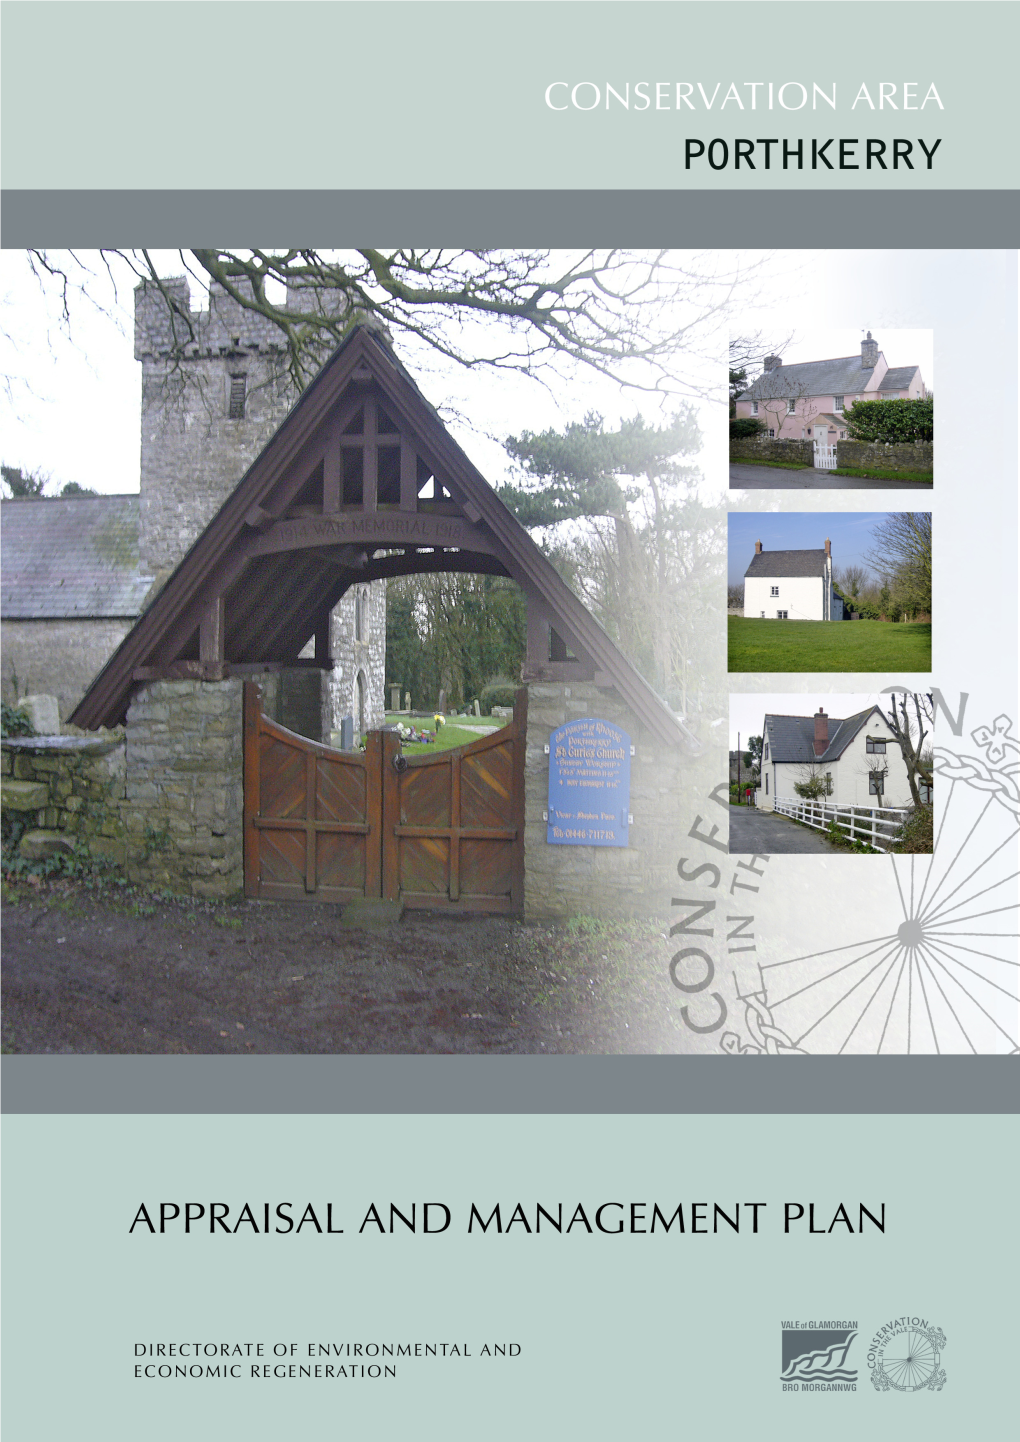 Porthkerry Conservation Area Appraisal and Management Plan